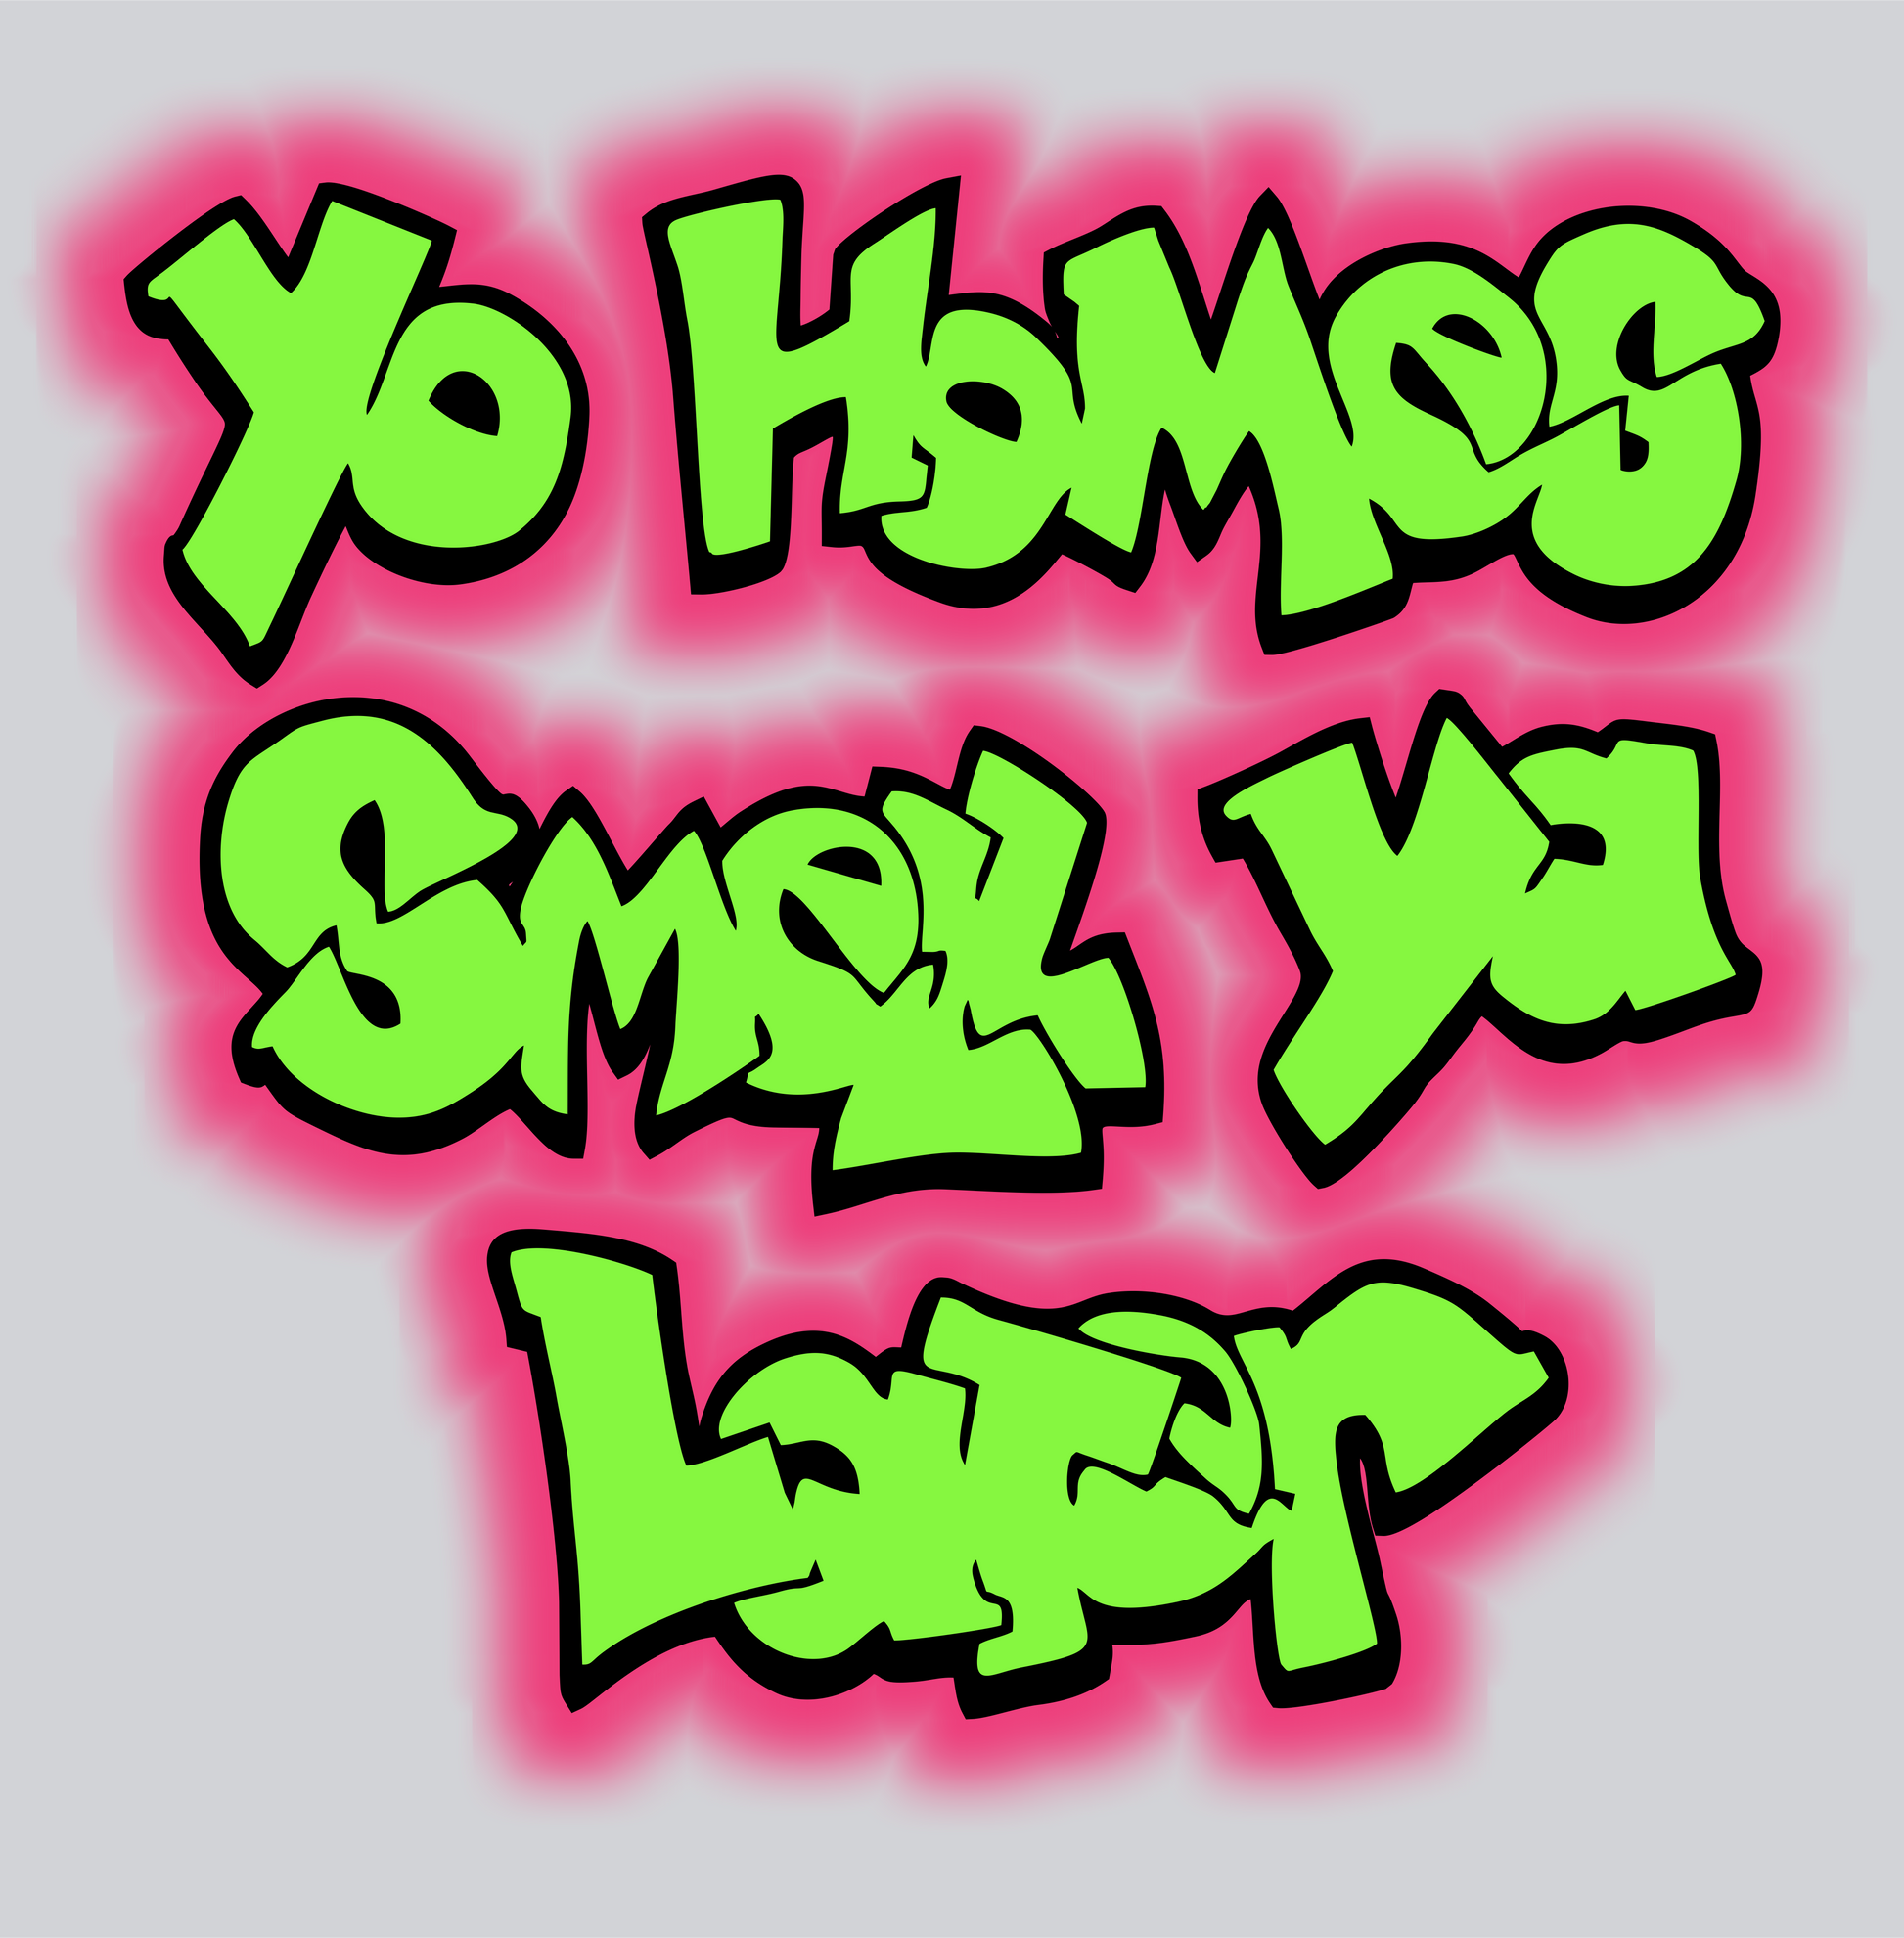 yo homes smell ya later fresh prince of bel air DTG design graphic